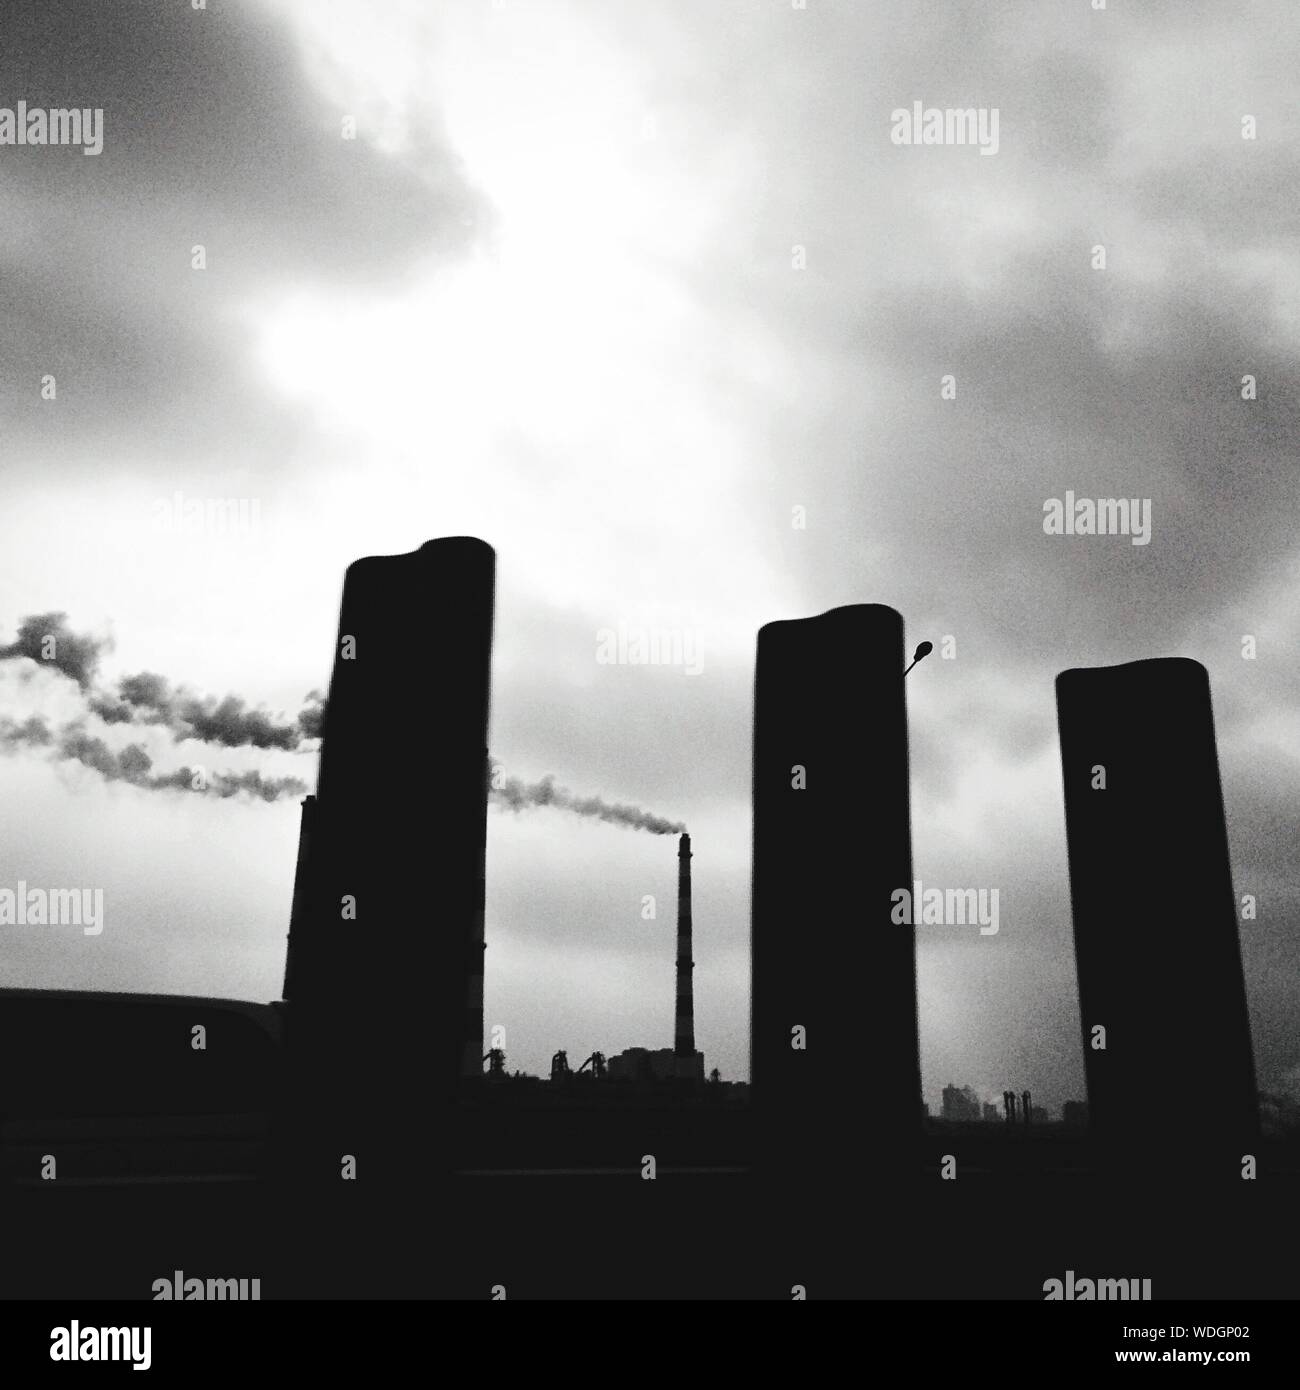 Low Angle View Of Factory With Smoke Stack Emitting Pollution Stock Photo